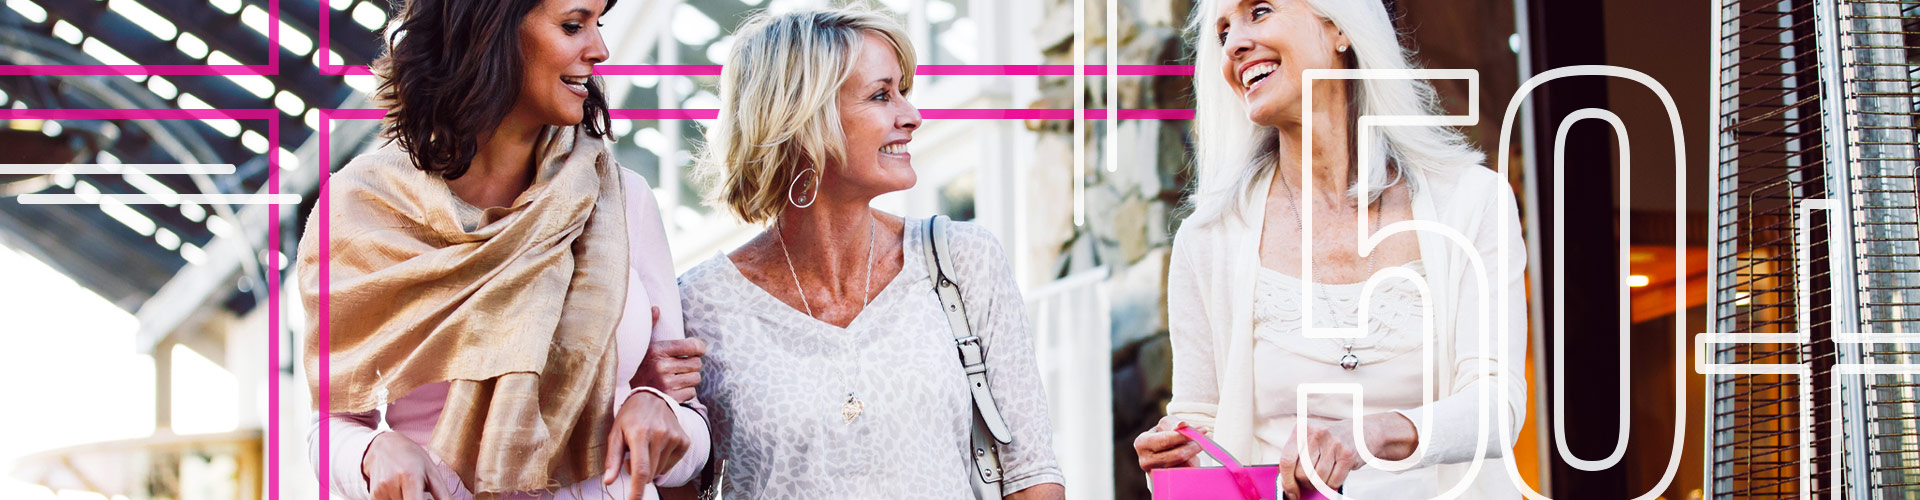 Beauty Over 50 Blog banner featuring three older women smiling with shopping bags